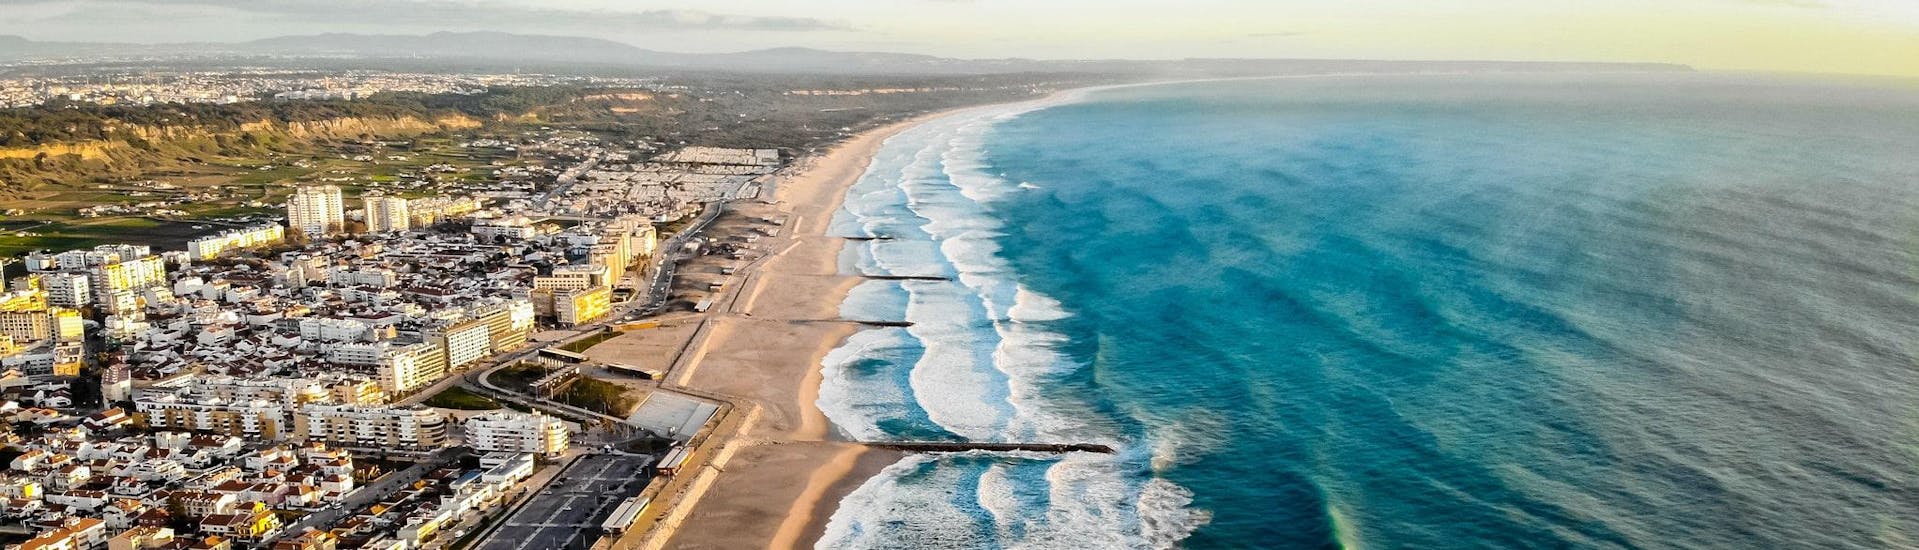 An aerial view of the beach of Costa da Caparica, a popular spot for surfing lessons near Lisbon.